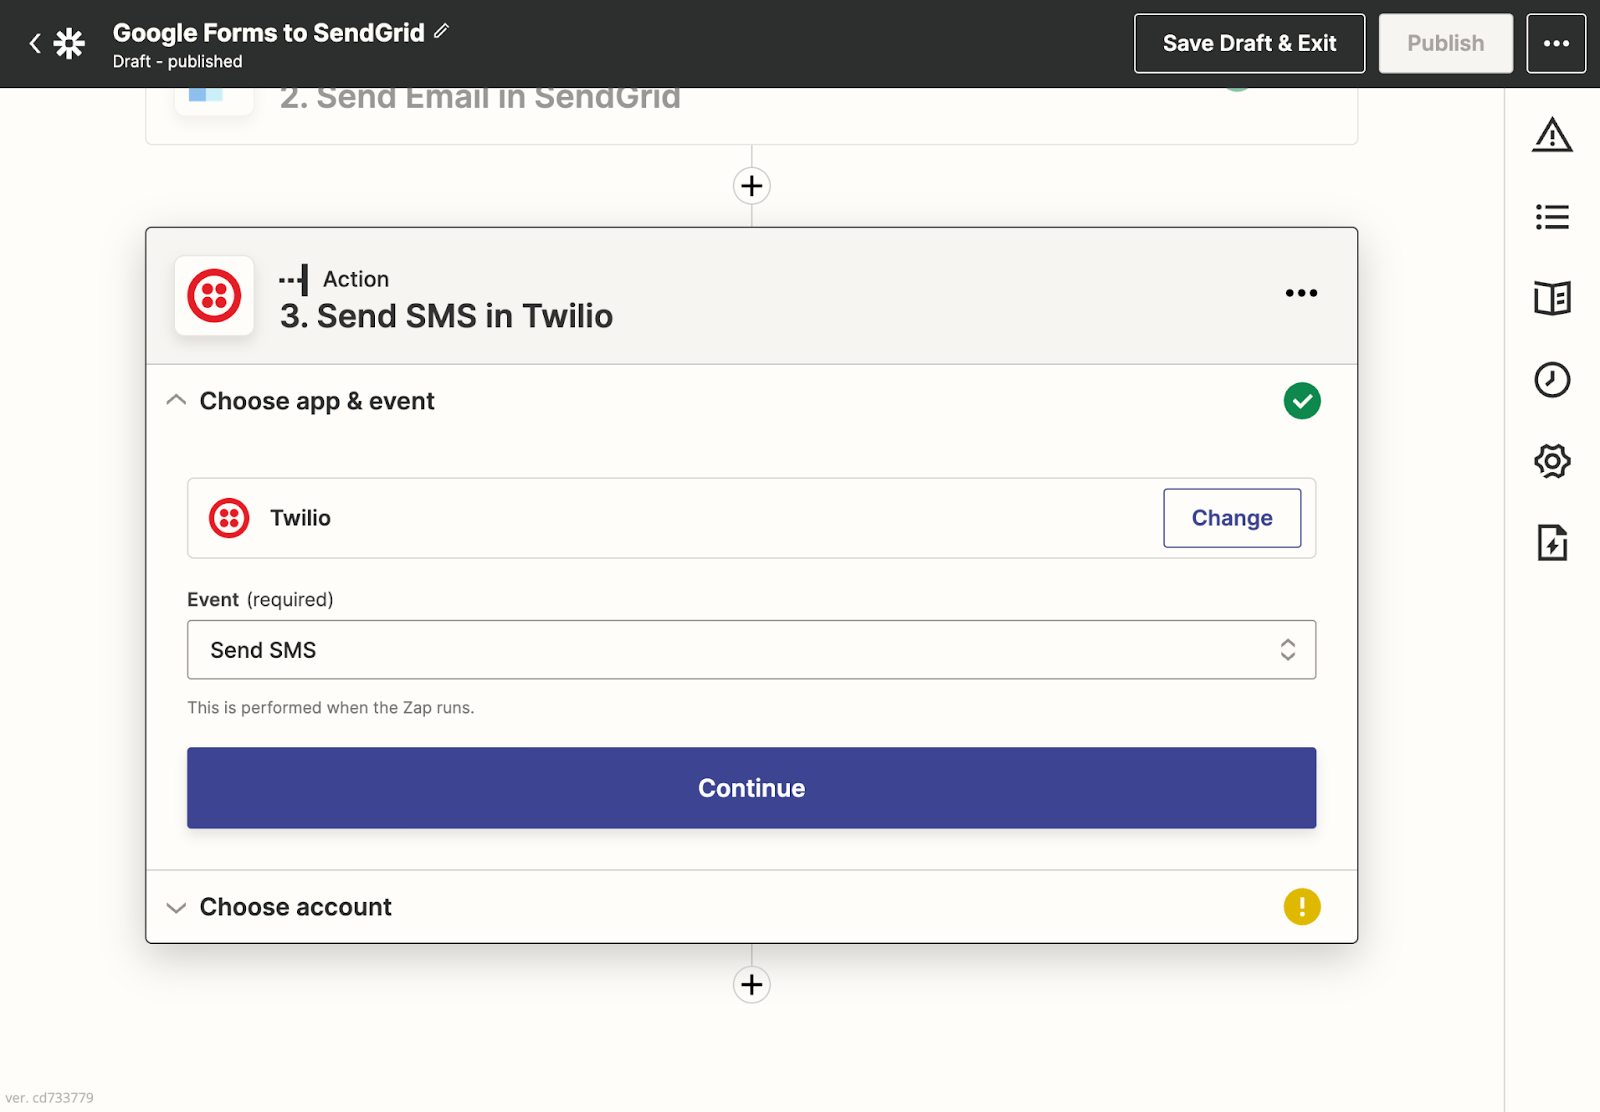 The user selected "Twilio" as the action in the Zapier flow and selected "Send SMS" for the "Event" dropdown.